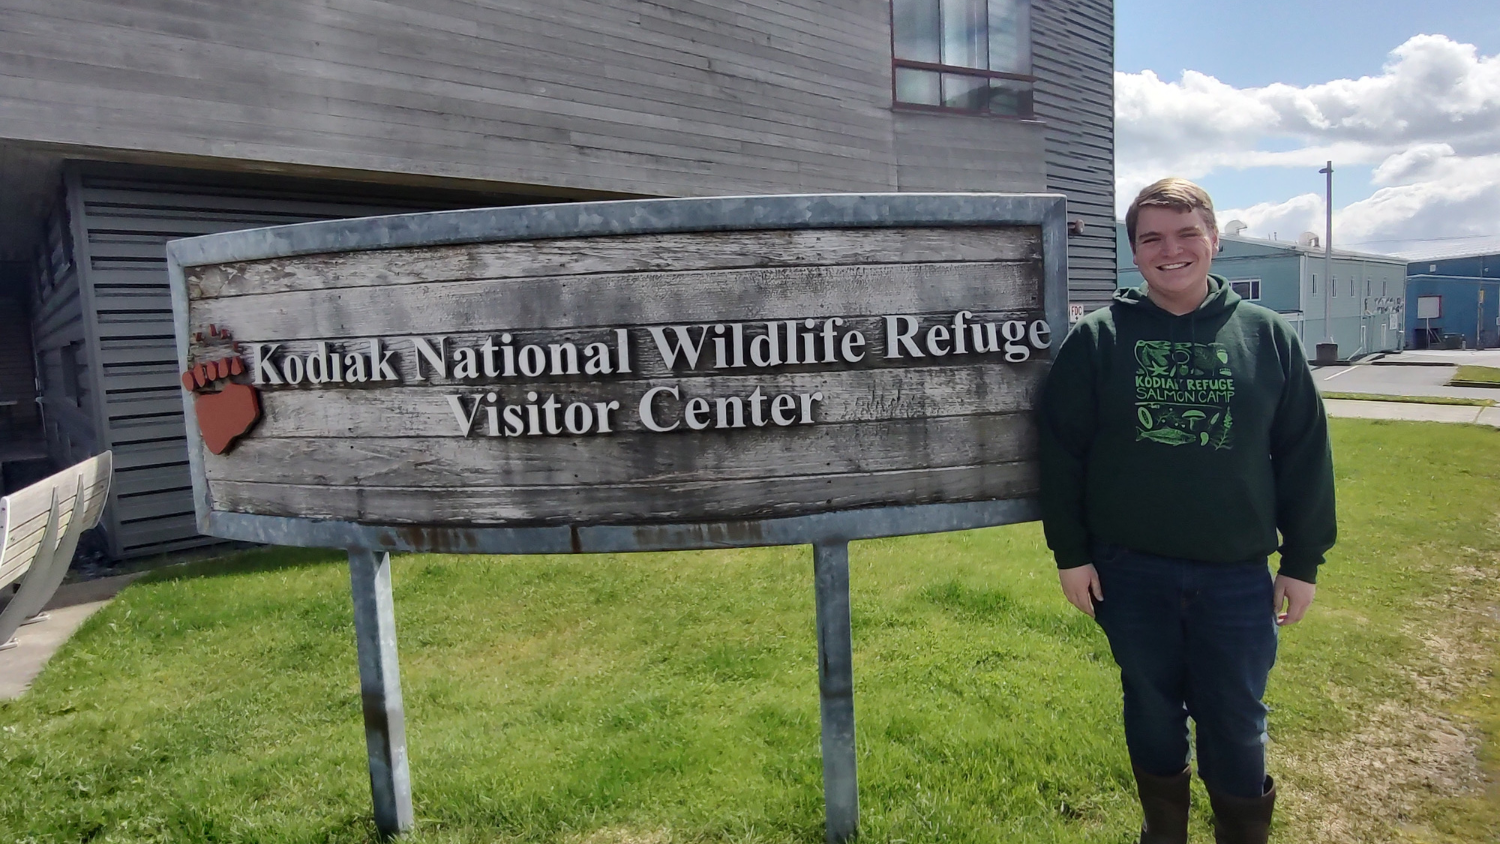 John poses in front of sign - John Mark Polk Educates Kids About Alaska's Habitats - College of Natural Resources at NC State University